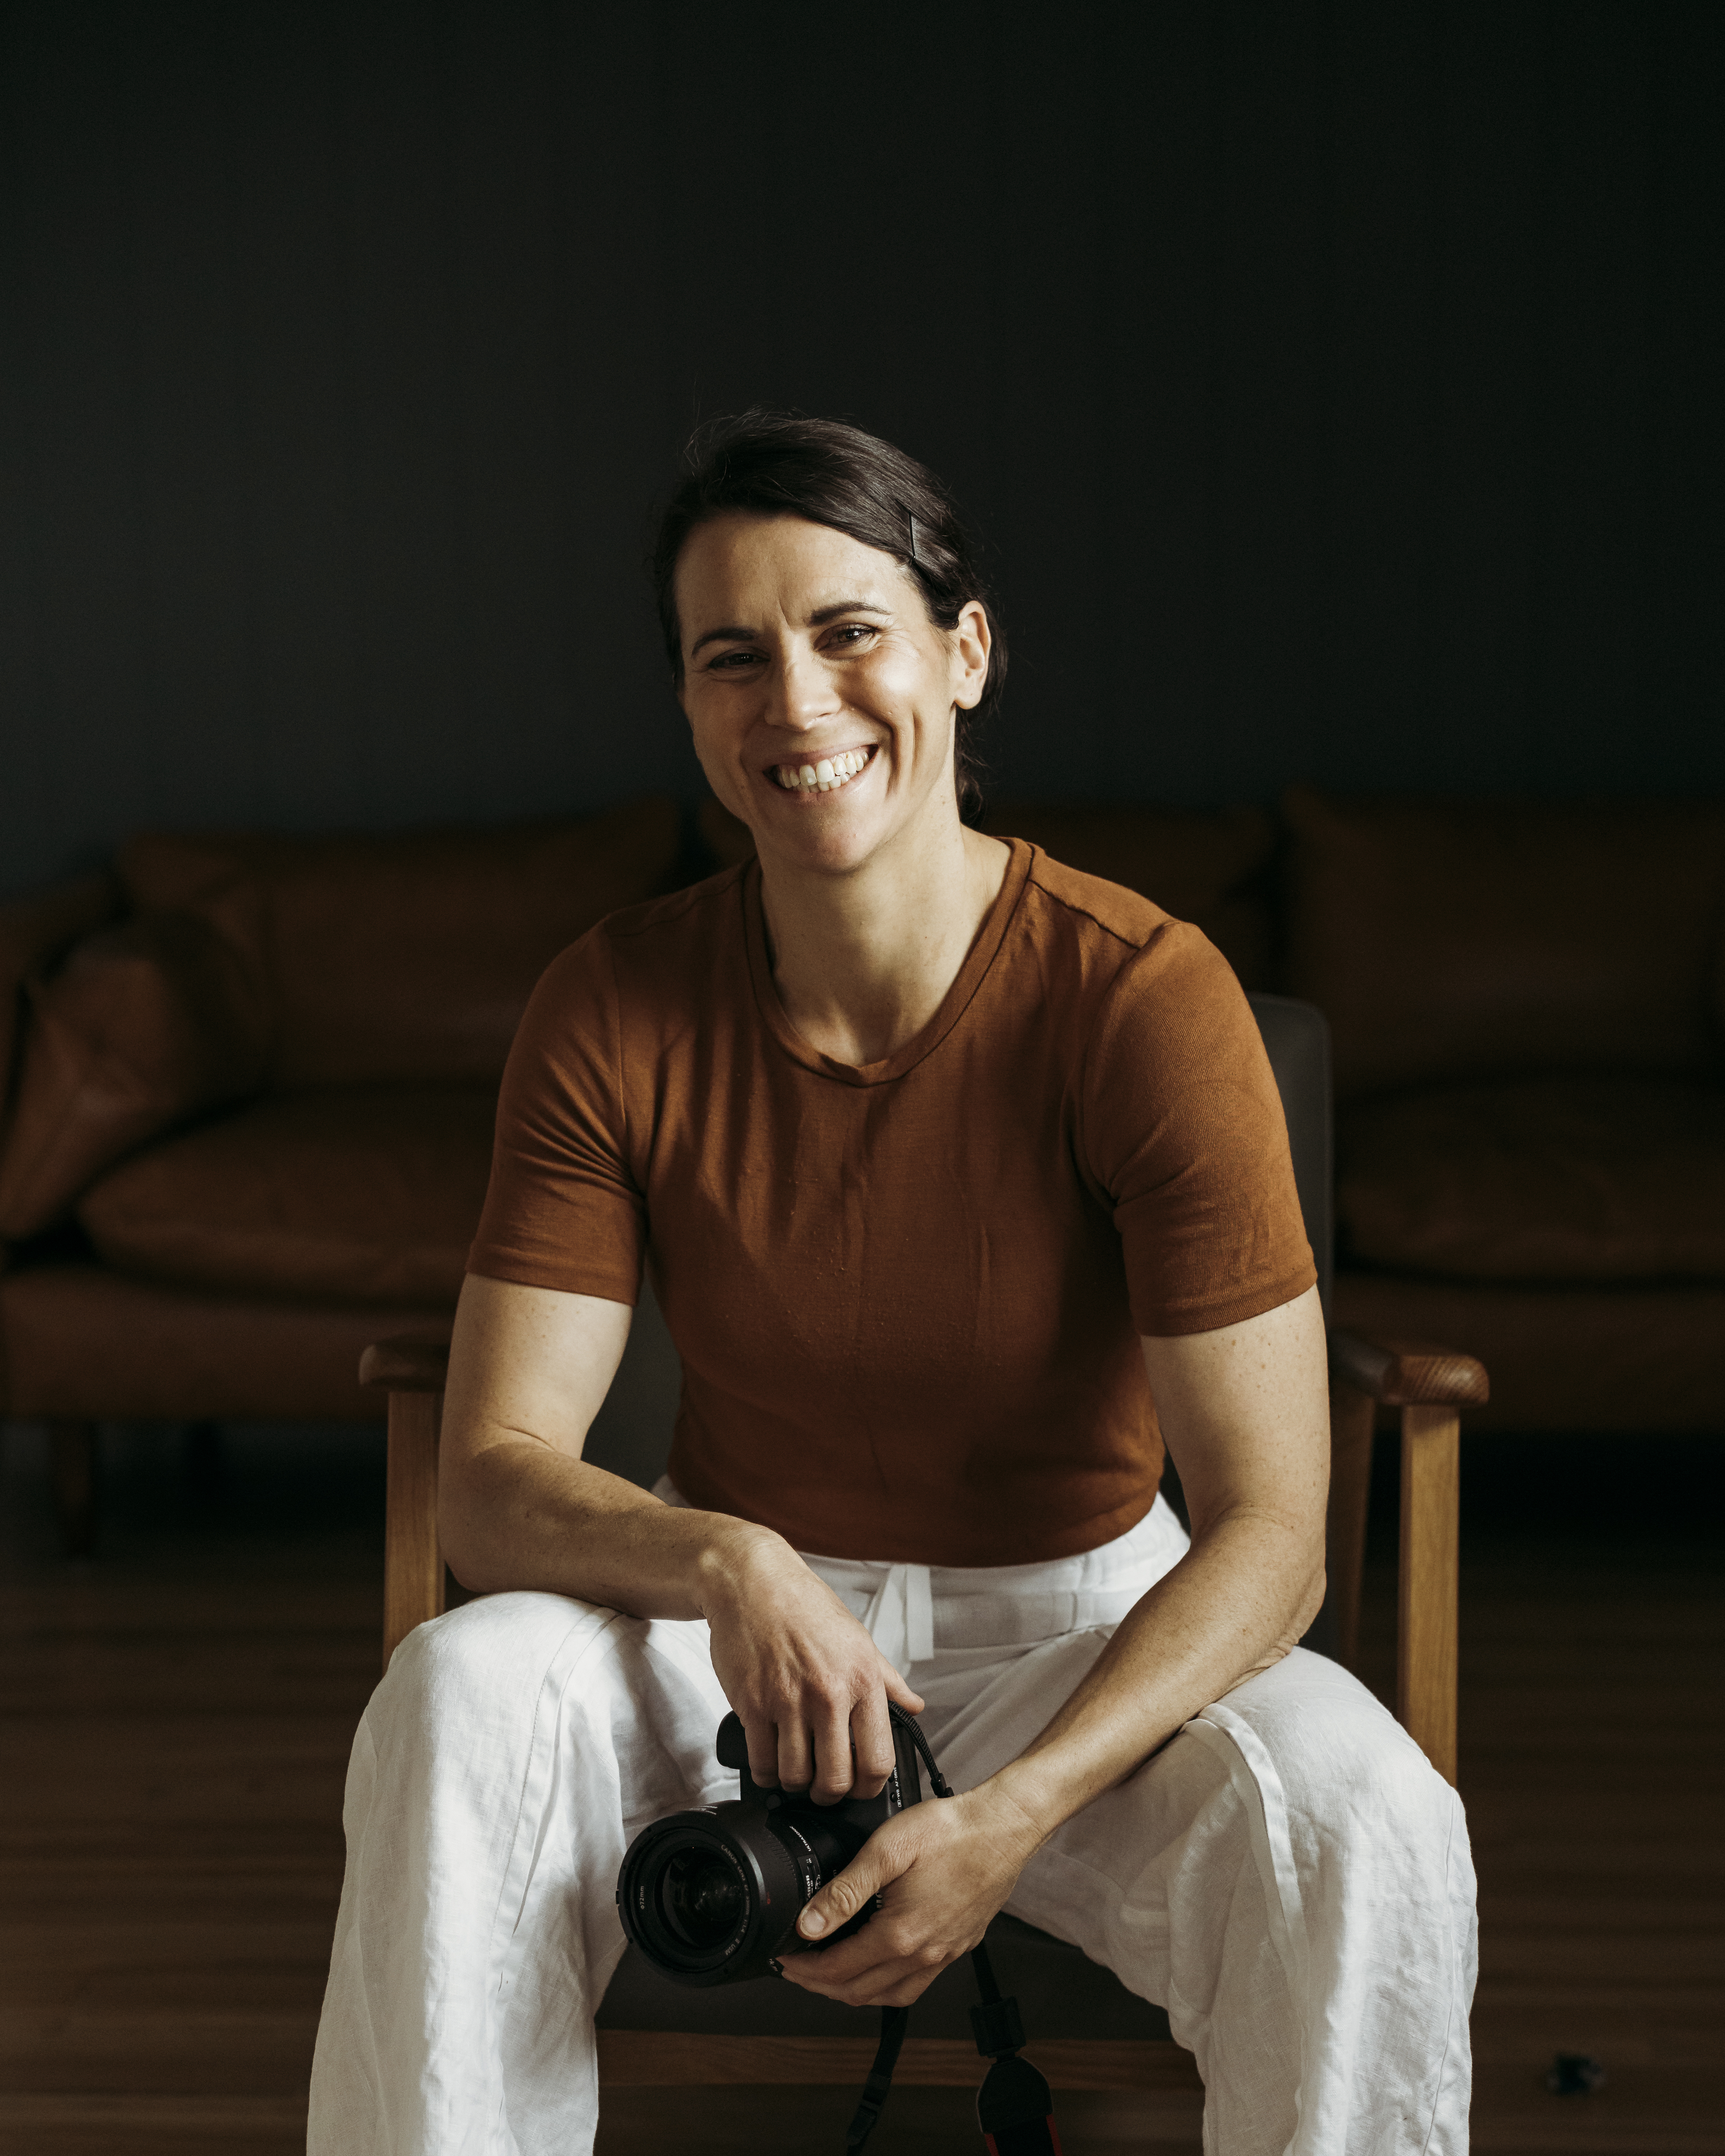 A woman sits on a chair looking at the camera smiling. She wears a warm brown structured t-shirt and white linen pants. She casually rests both arms on her legs as she holds a camera.